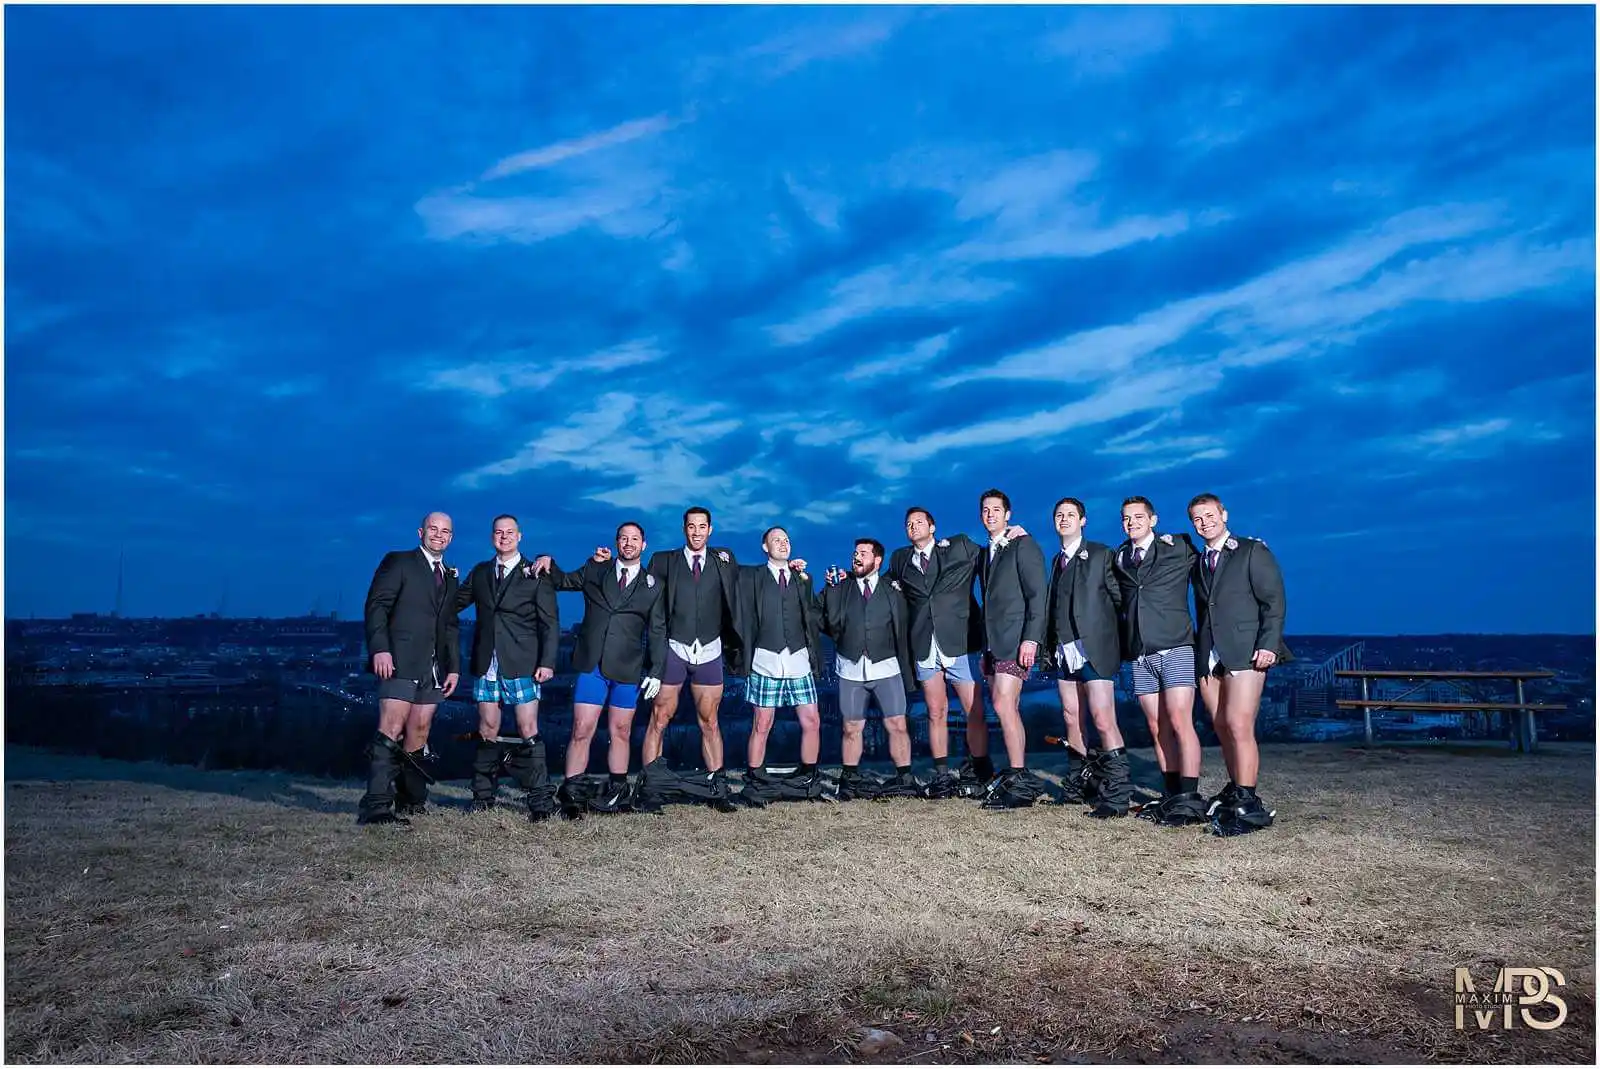 Men in underwear lined up with a scenic dusk skyline backdrop.